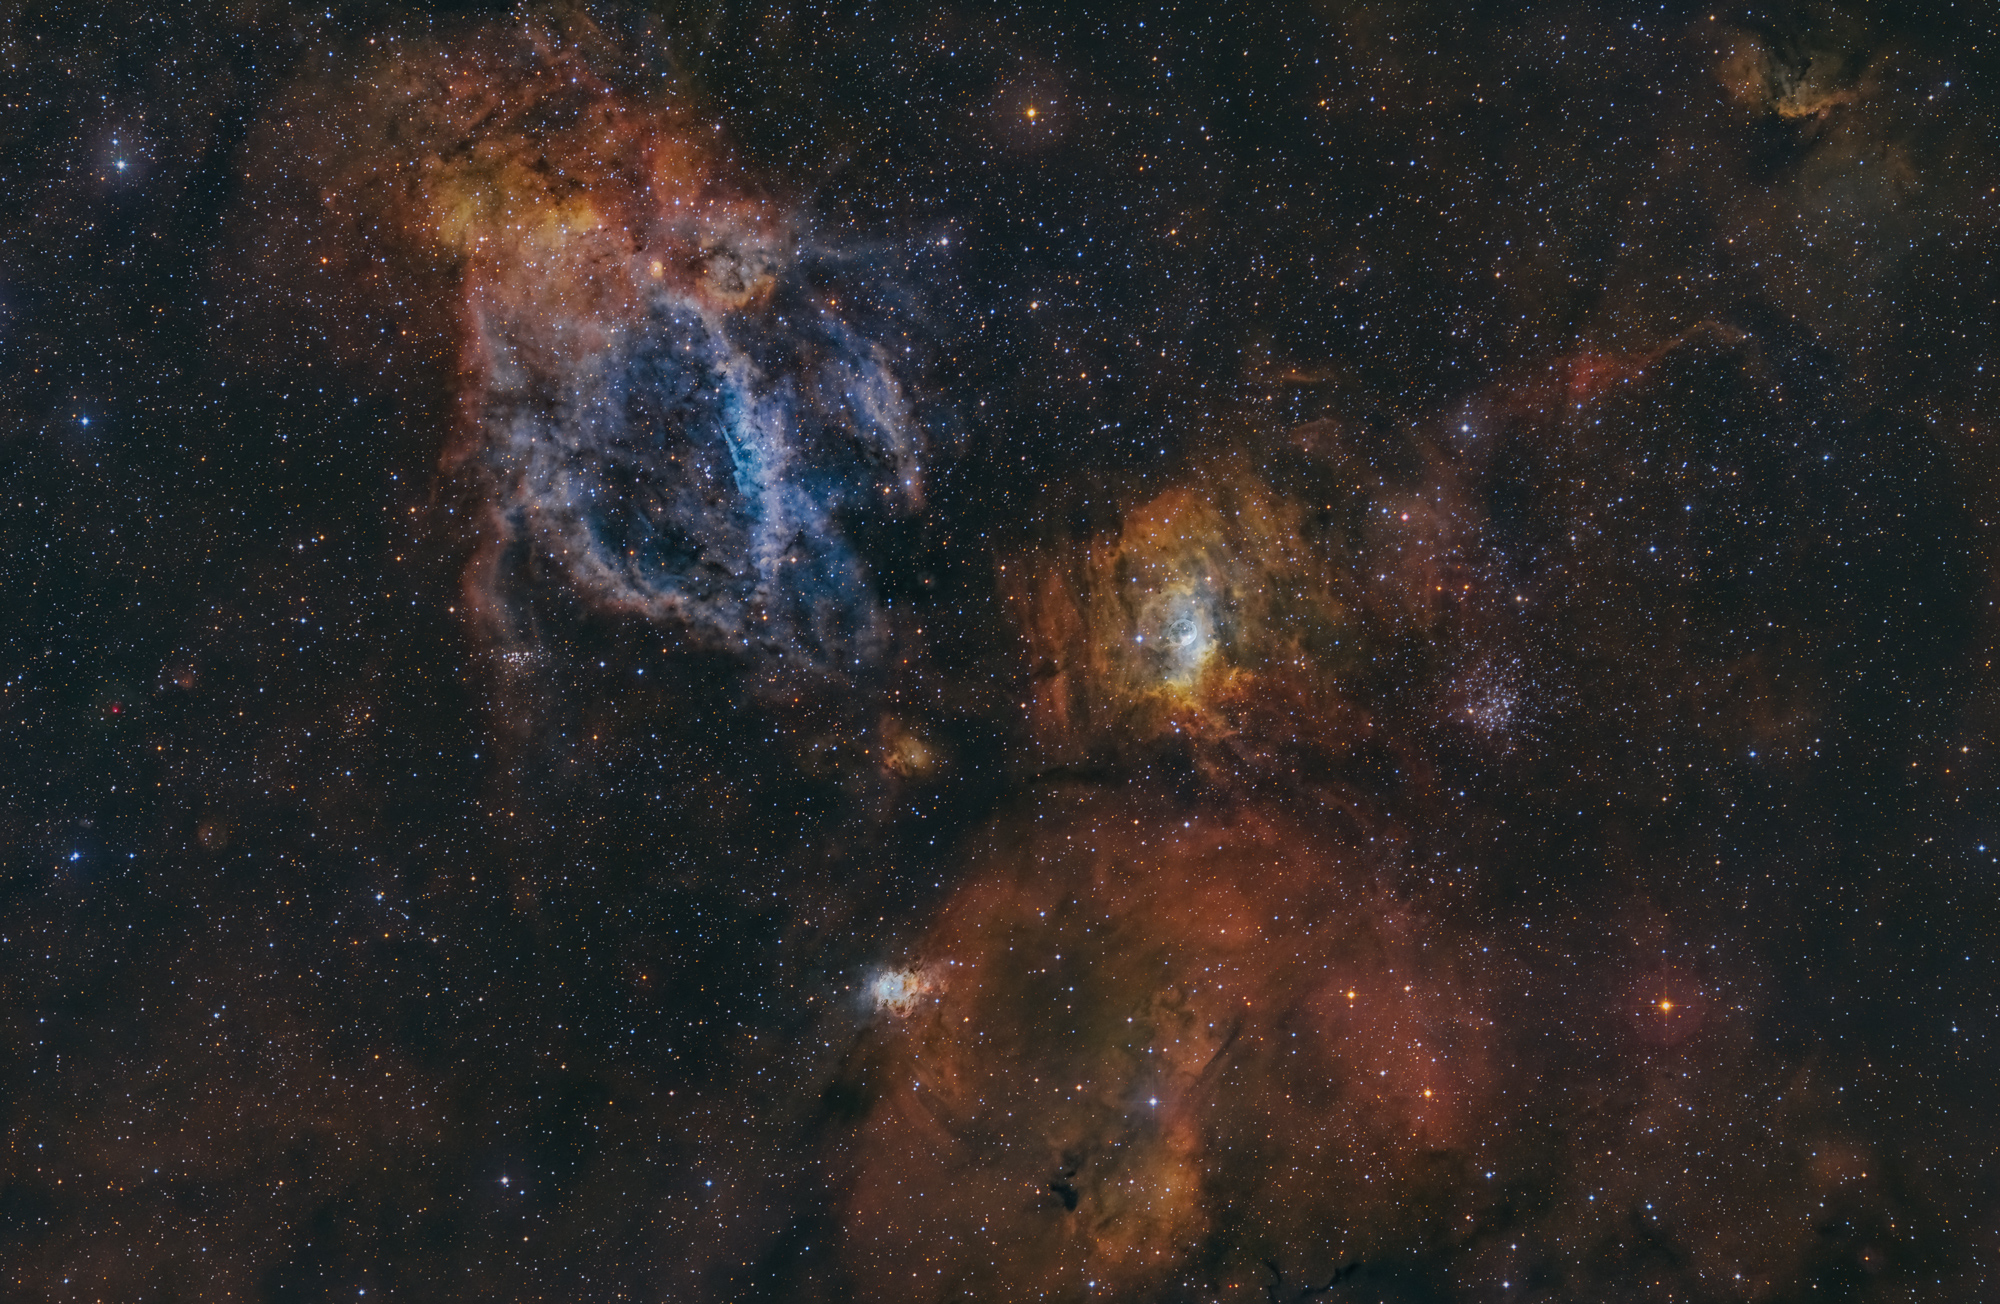 Bubble, Lobster and NGC7538